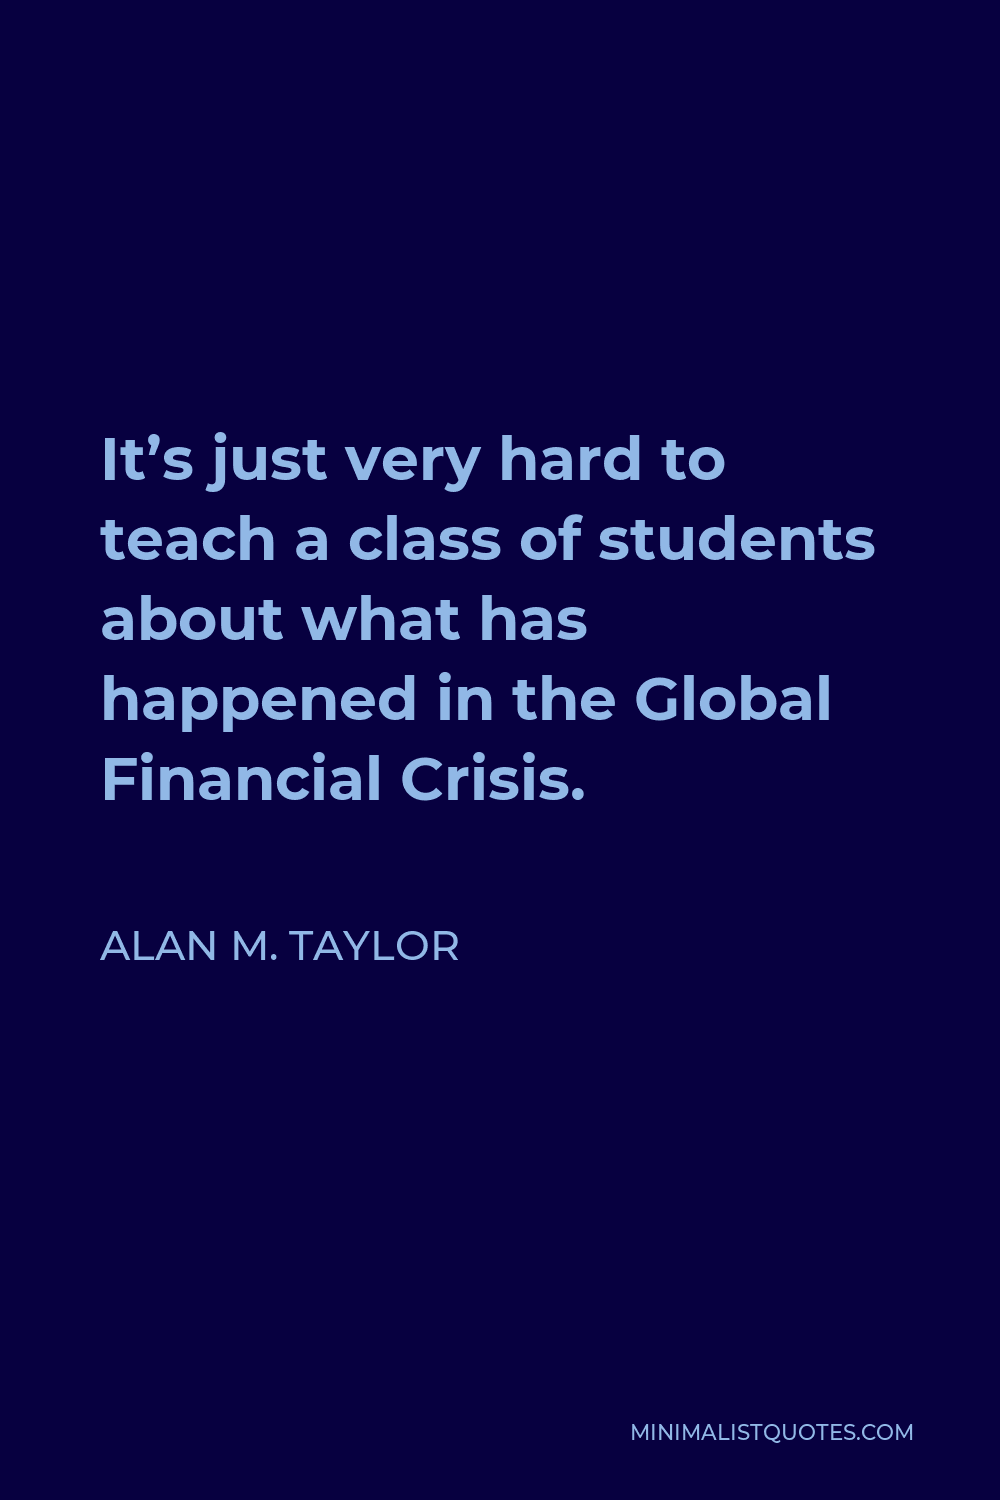 Alan M. Taylor Quote - It’s just very hard to teach a class of students about what has happened in the Global Financial Crisis.